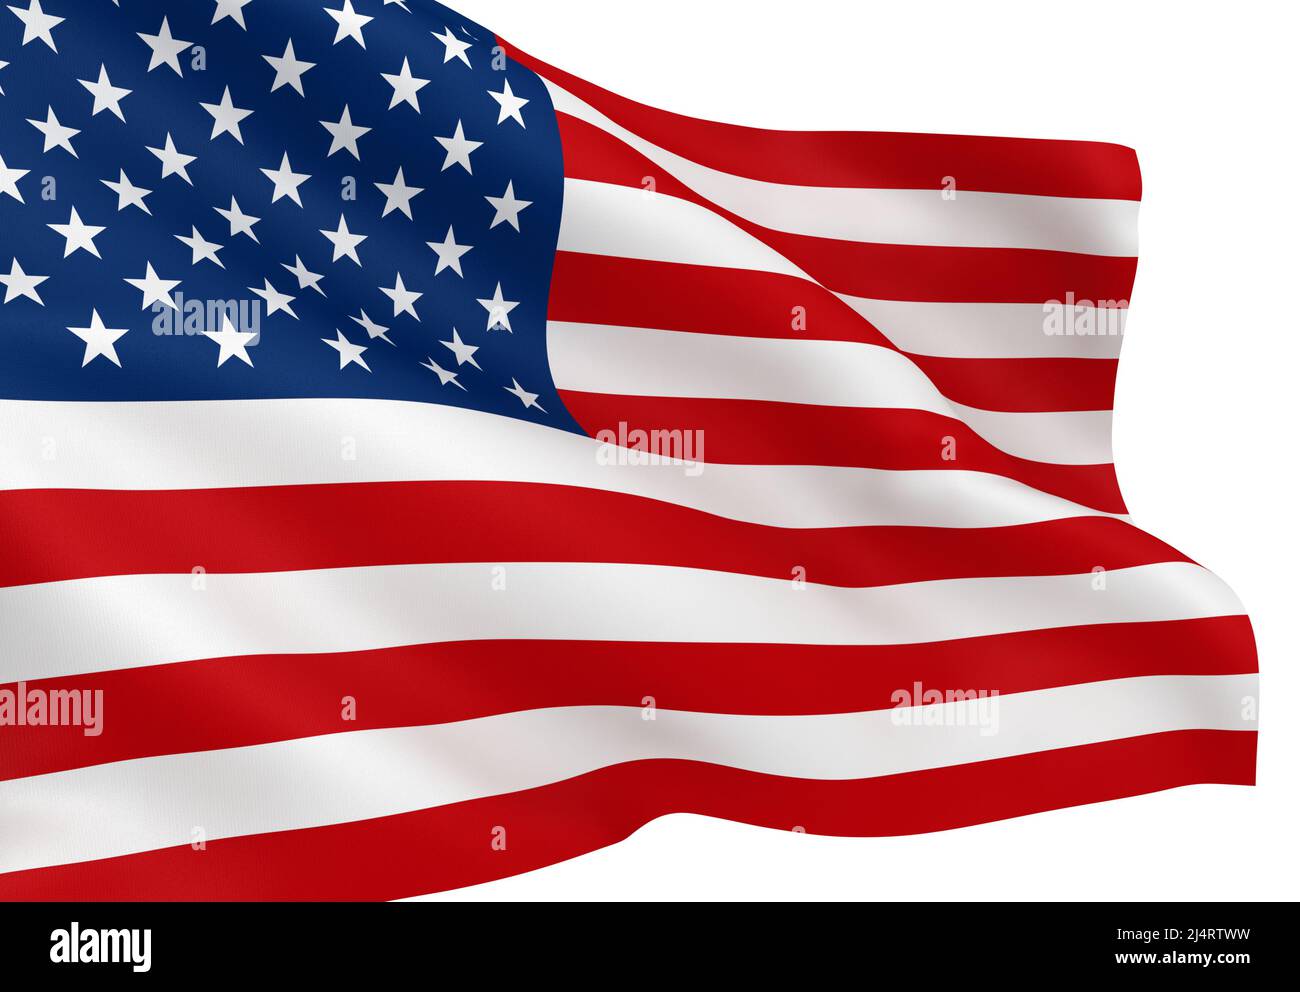 Waving American flag isolated over white background Stock Photo